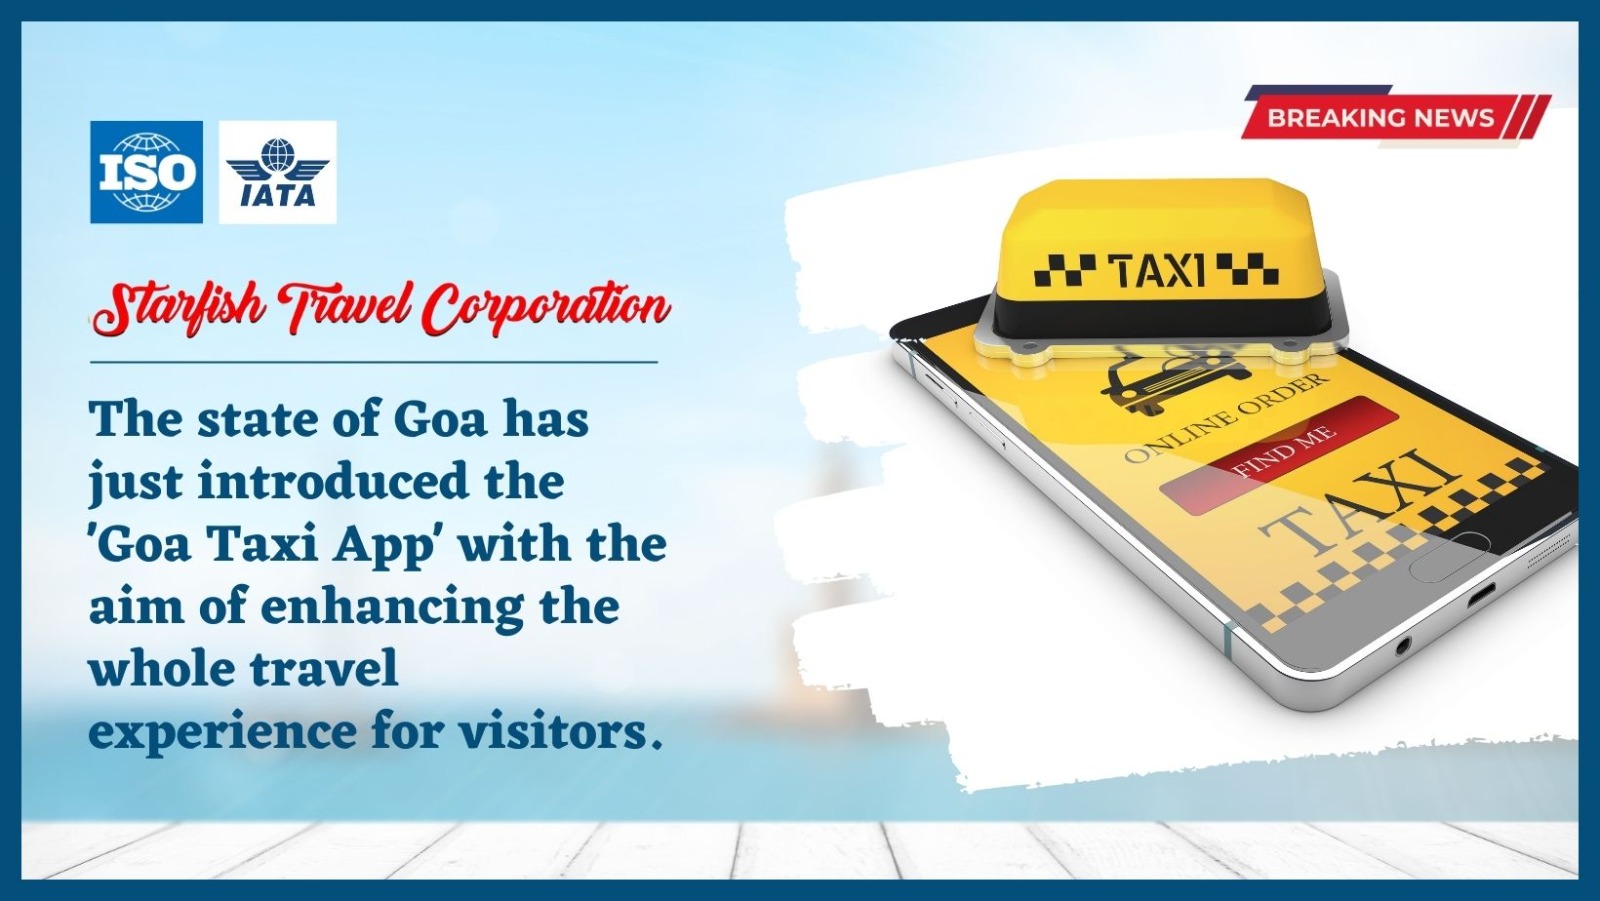 The state of Goa has just introduced the ‘Goa Taxi App’ with the aim of enhancing the whole travel experience for visitors.